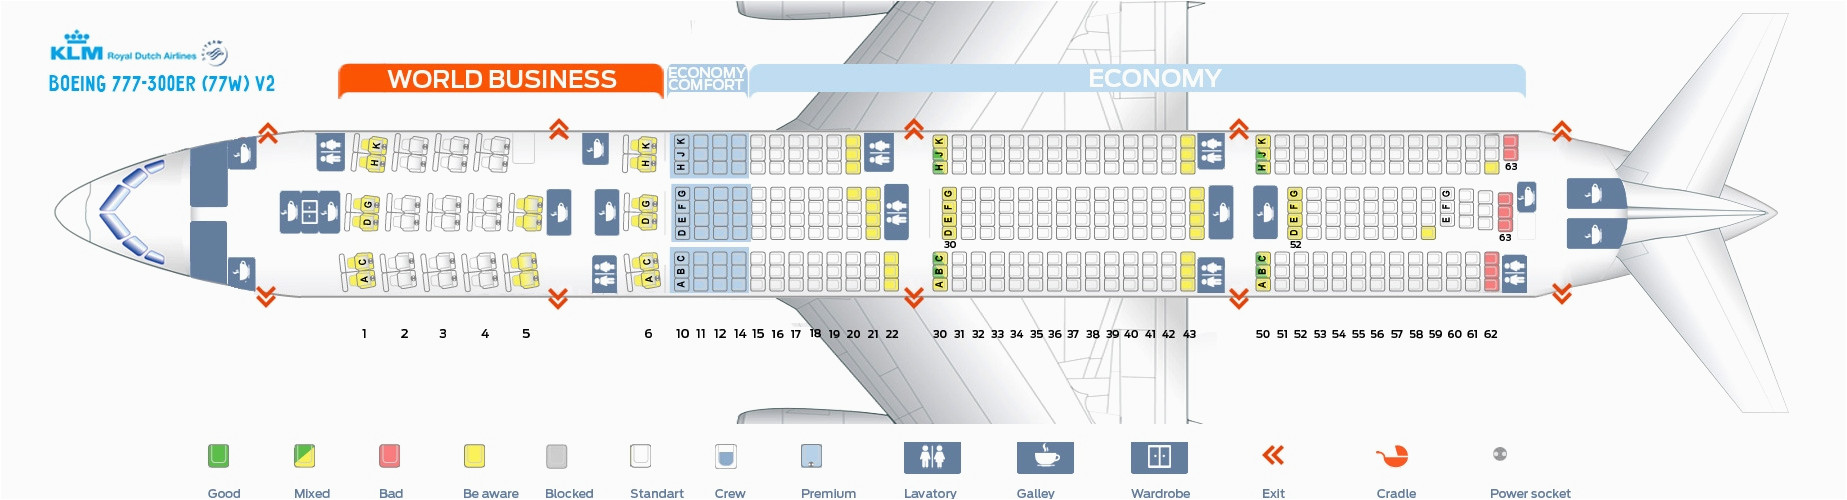 aircraft 77w seat map inspirational how to search for the best seat